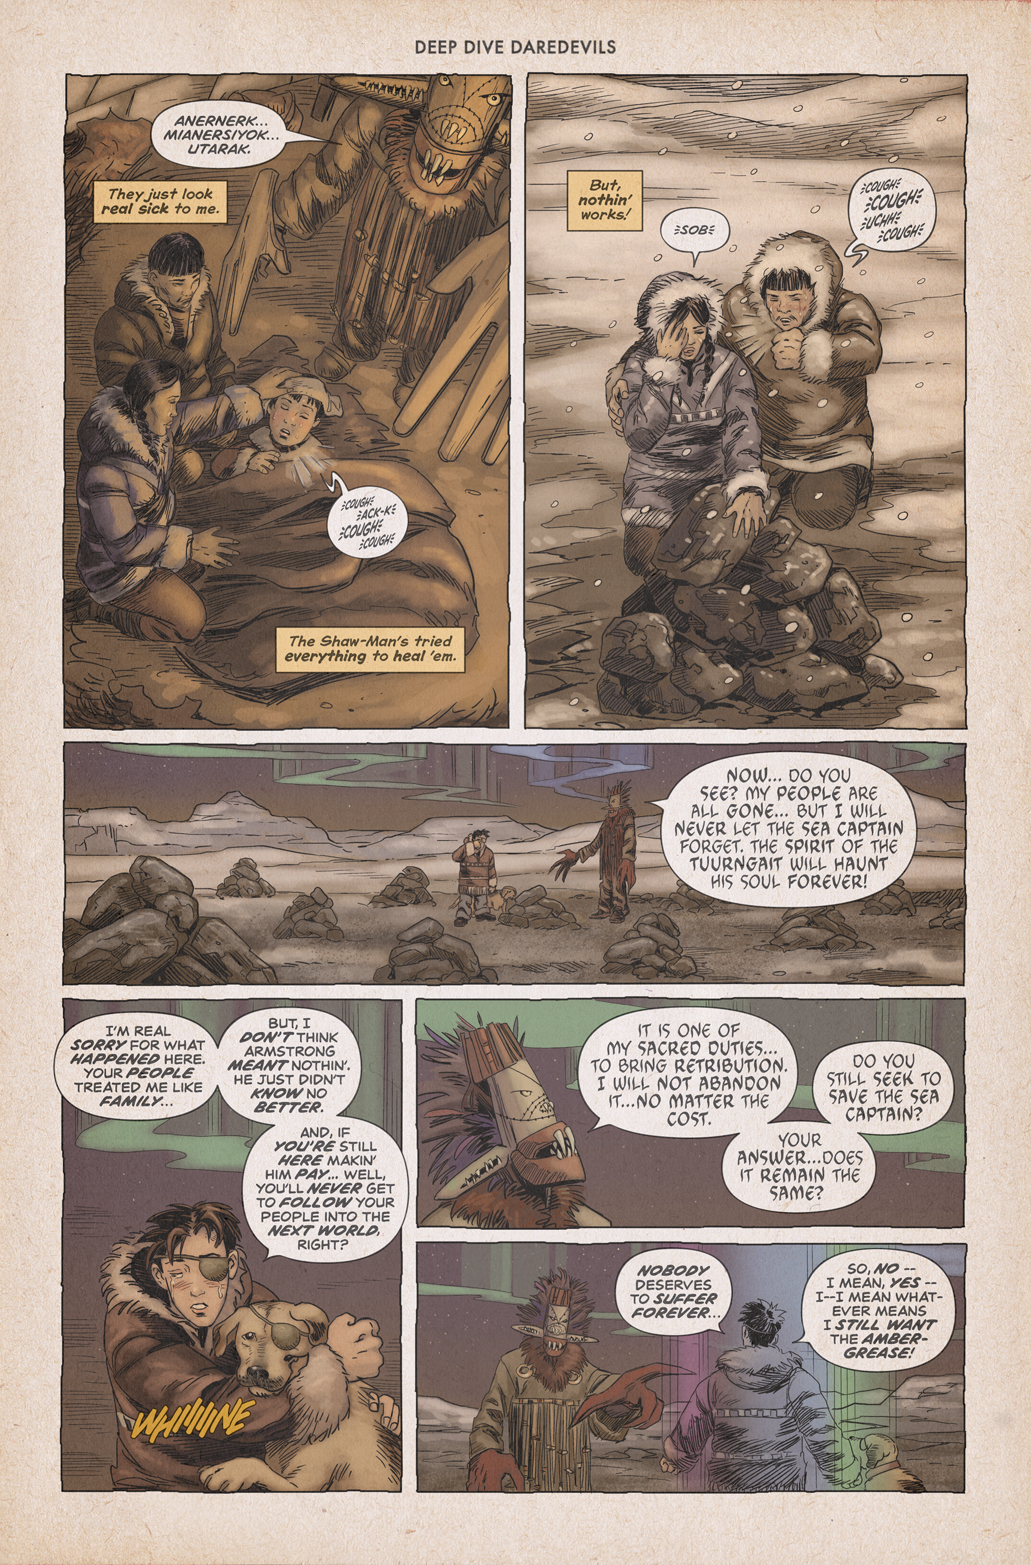 Secret of the Beaufort Sea – Page 33